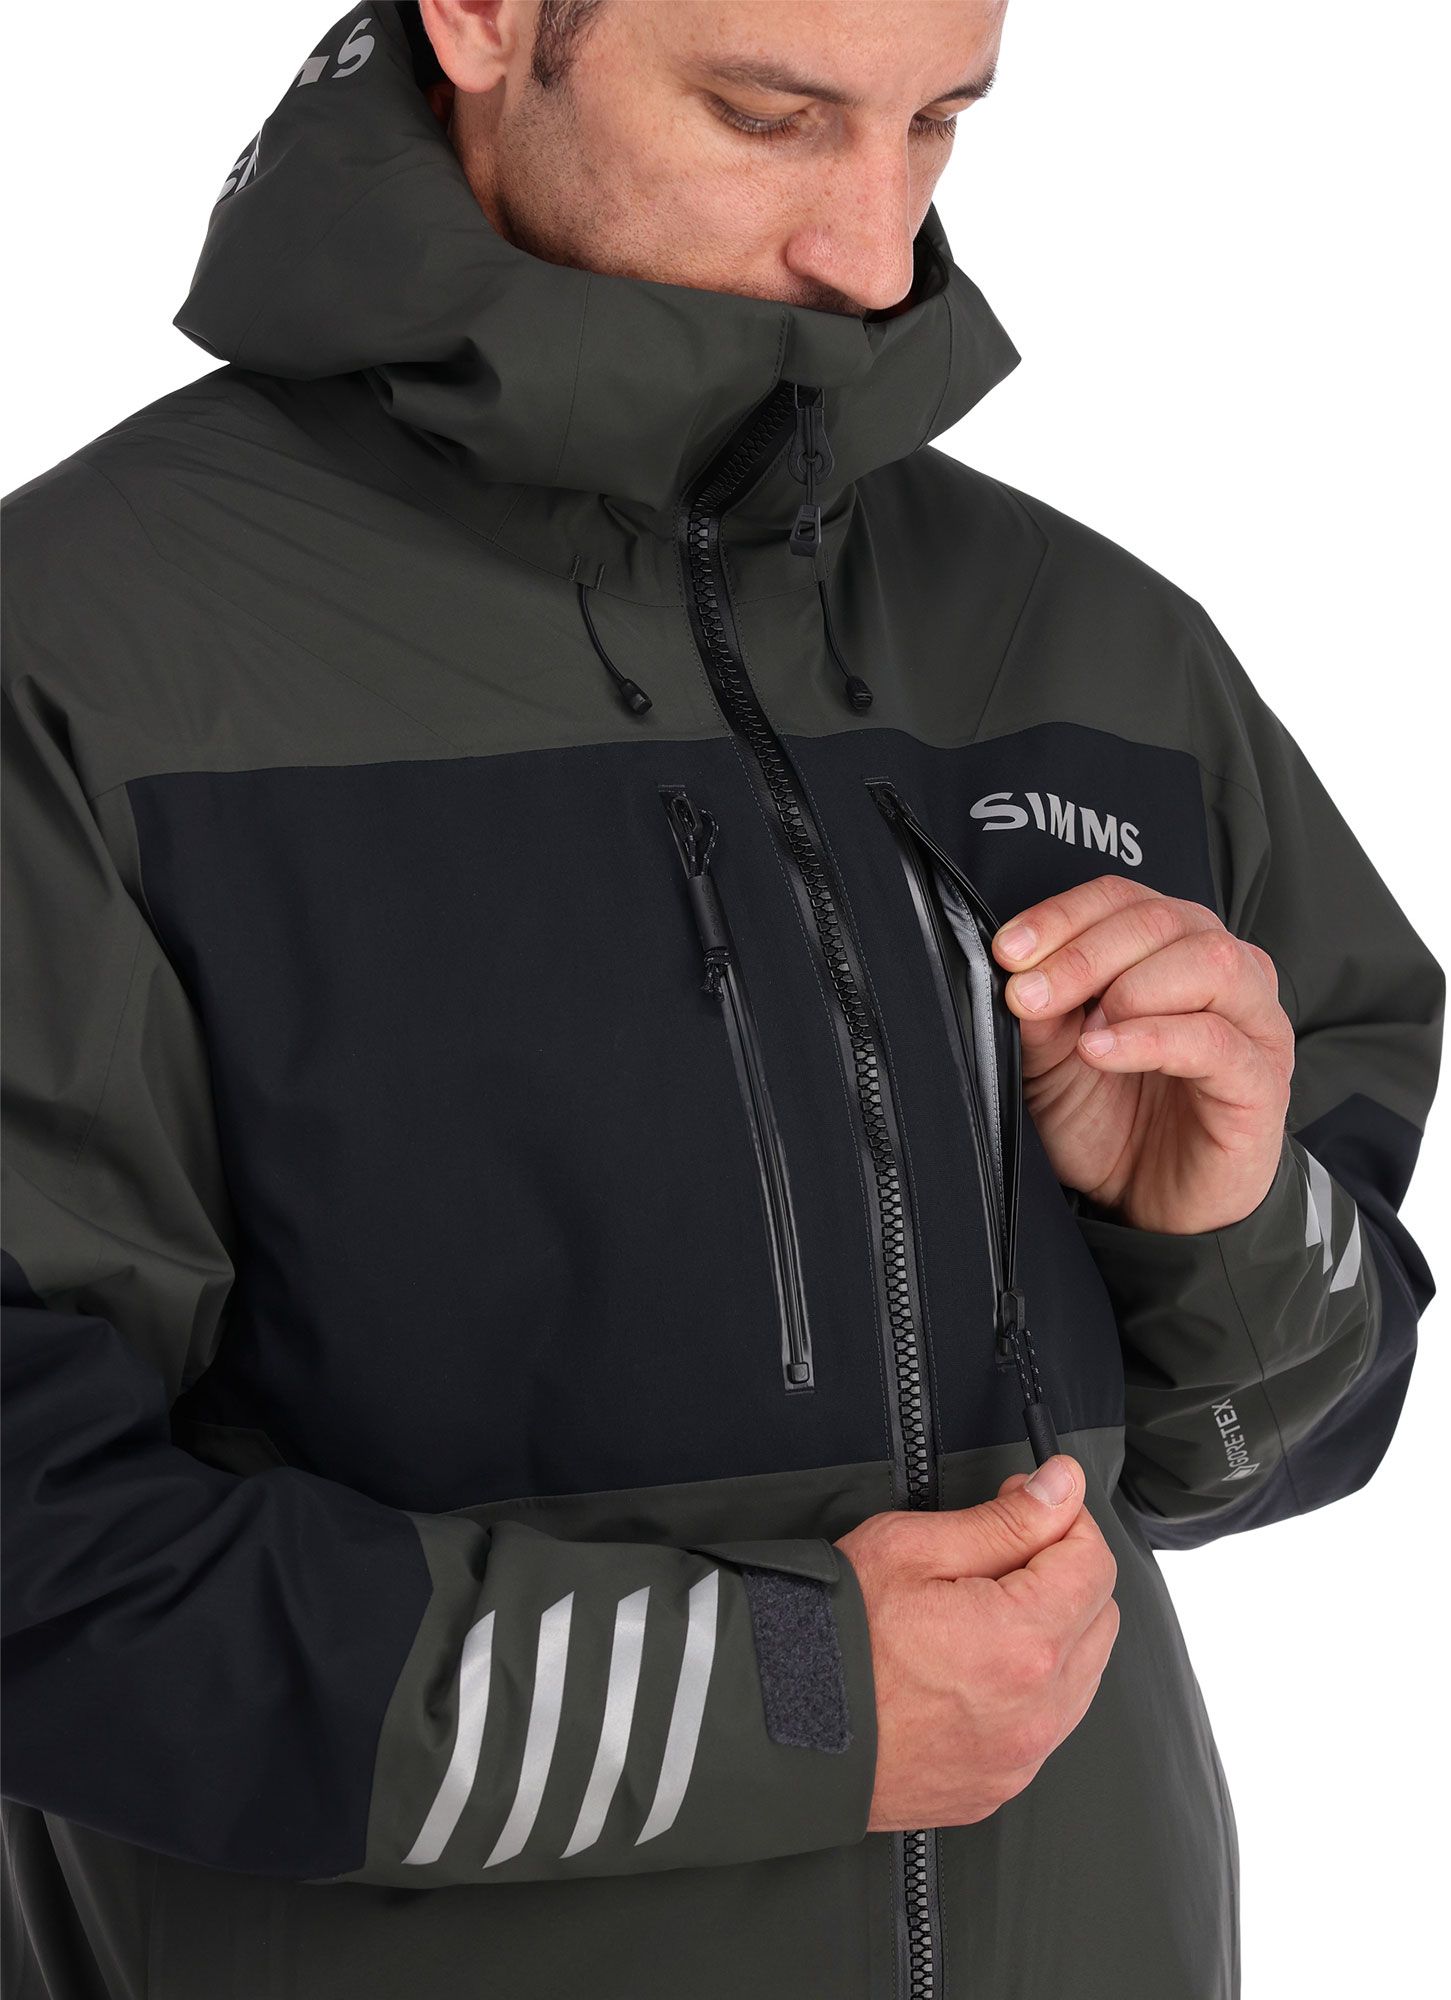 Simms Men's Guide Insulated Jacket